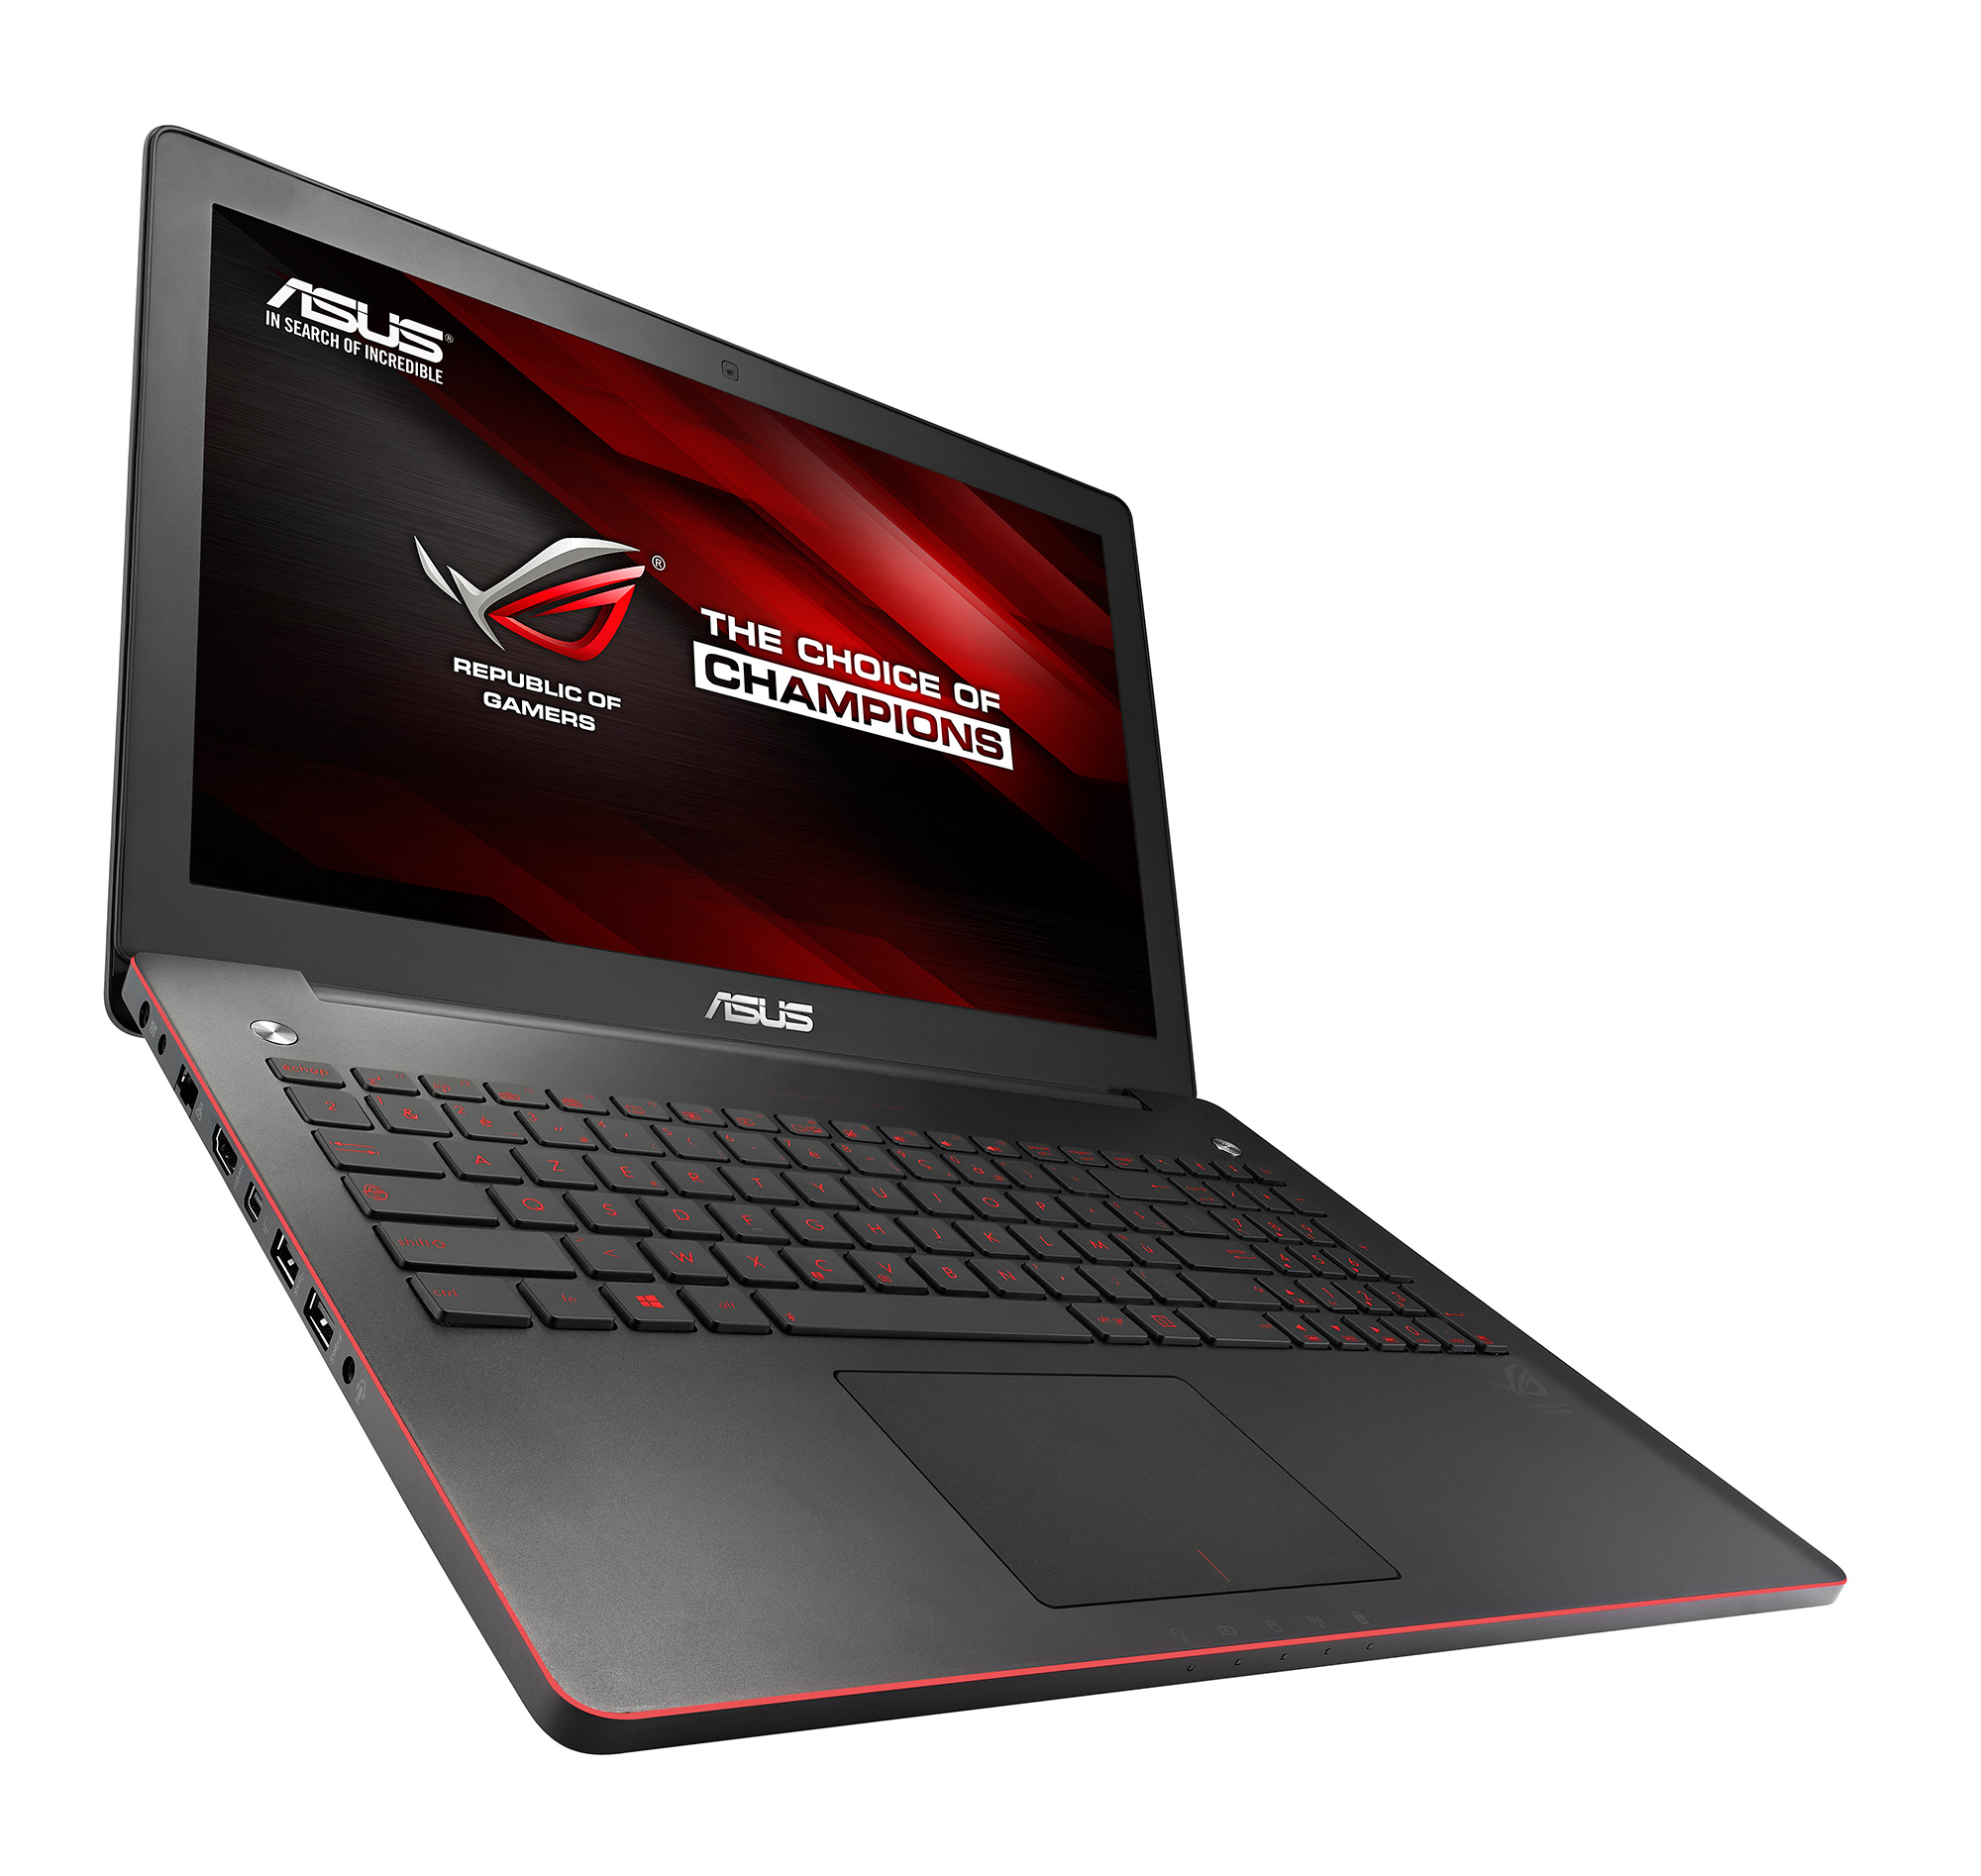 Media asset in full size related to 3dfxzone.it news item entitled as follows: ASUS annuncia il gaming notebook Republic of Gamers G550JK | Image Name: news21247_ASUS-G550JK-gaming-notebook_1.jpg